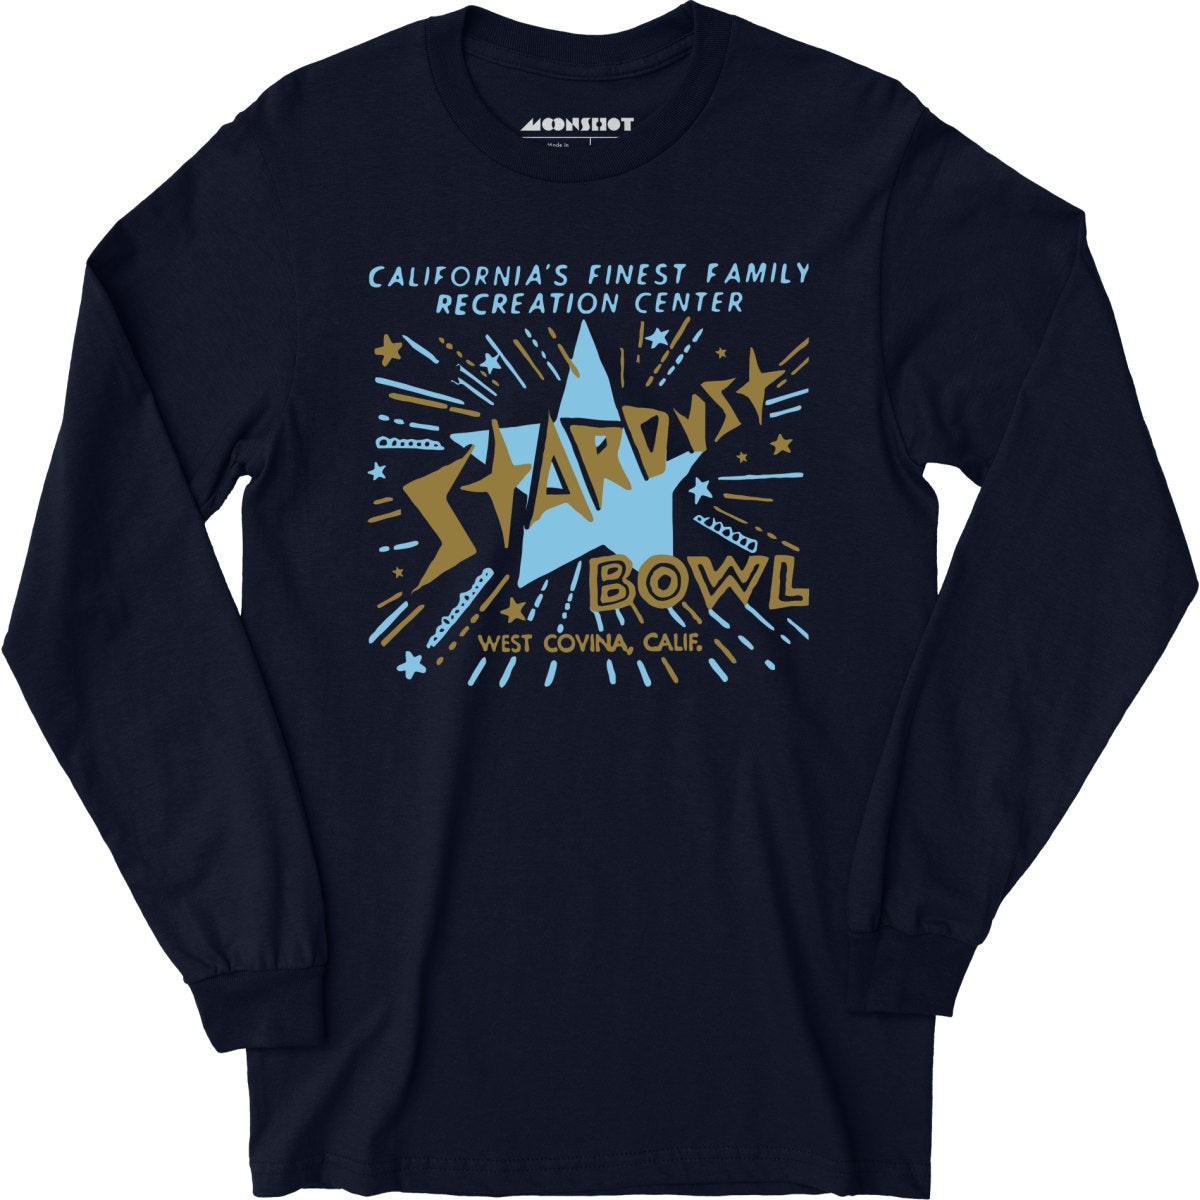 Stardust Bowl - West Covina, CA - Vintage Bowling Alley - Long Sleeve T-Shirt